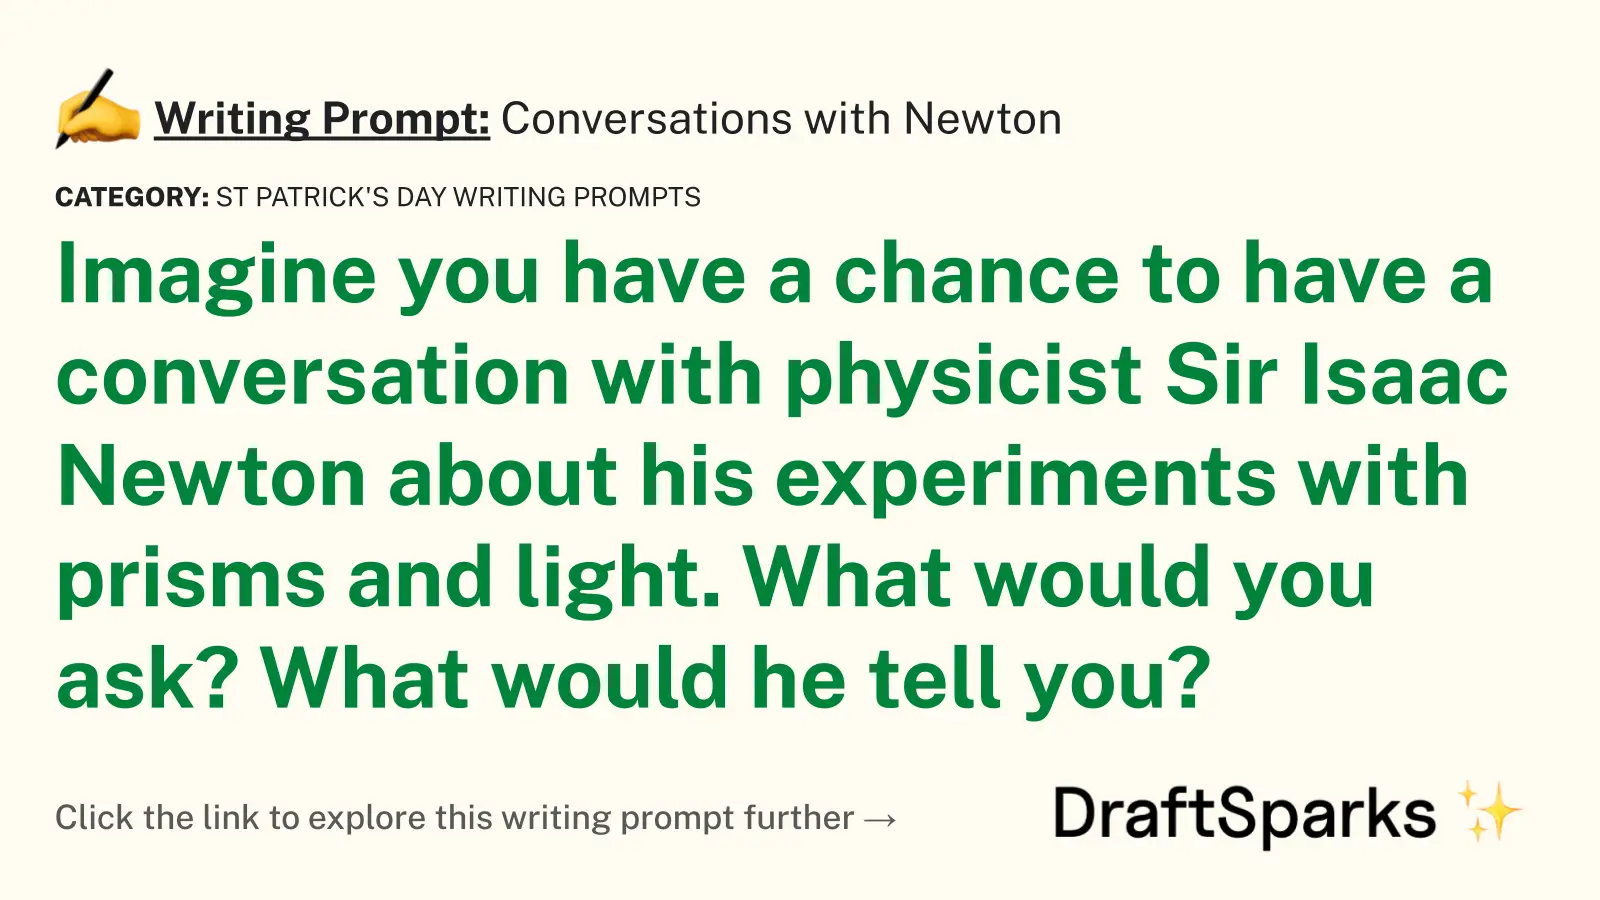 Conversations with Newton